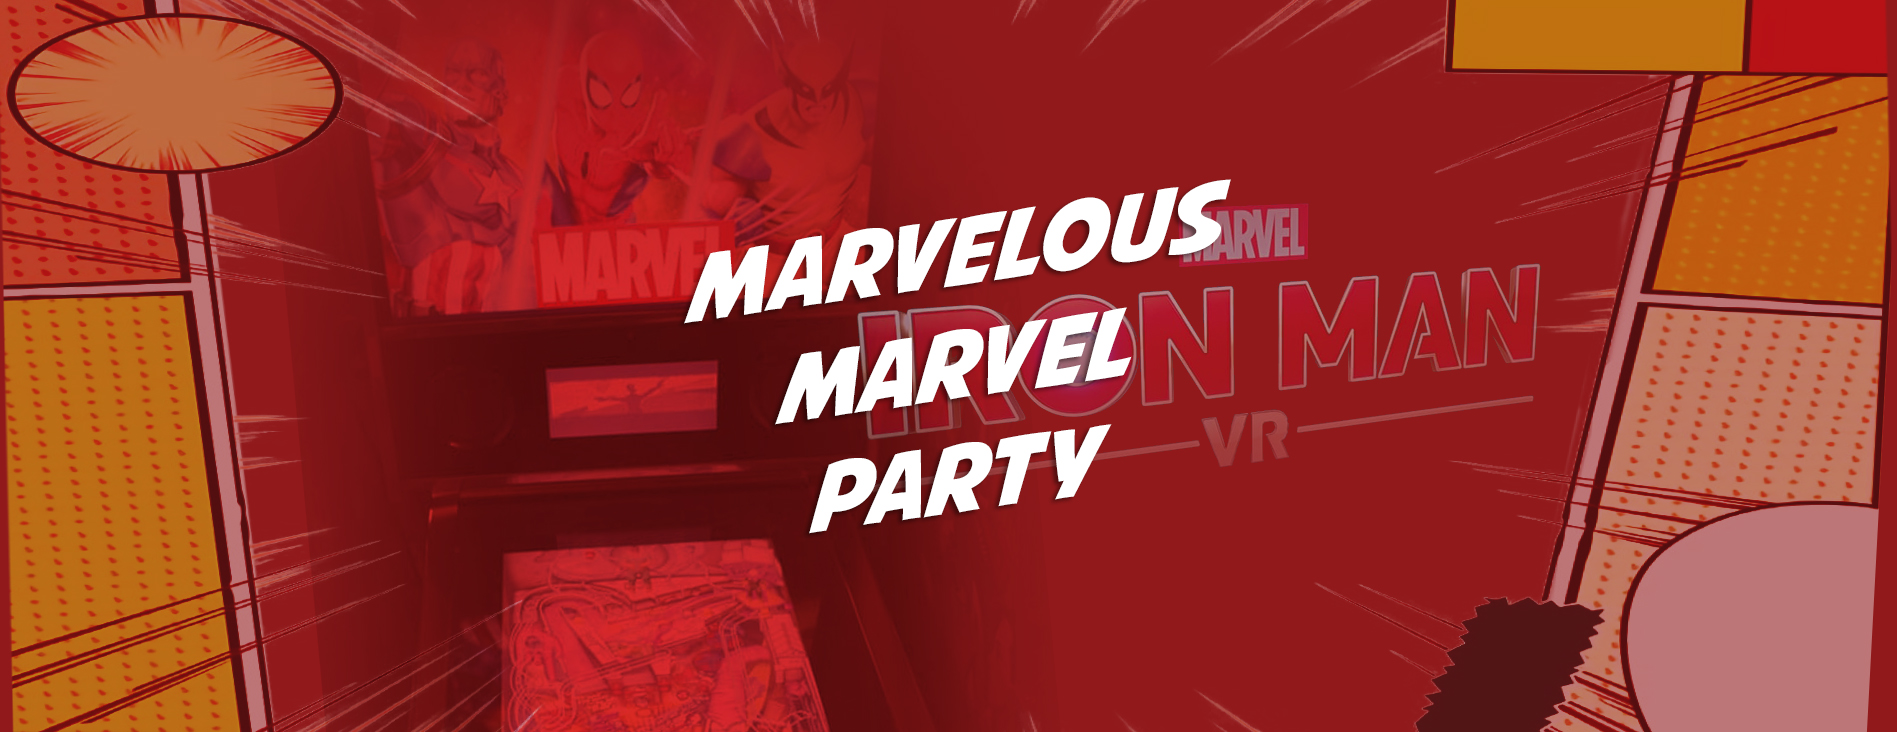 Marvelous Marvel Party